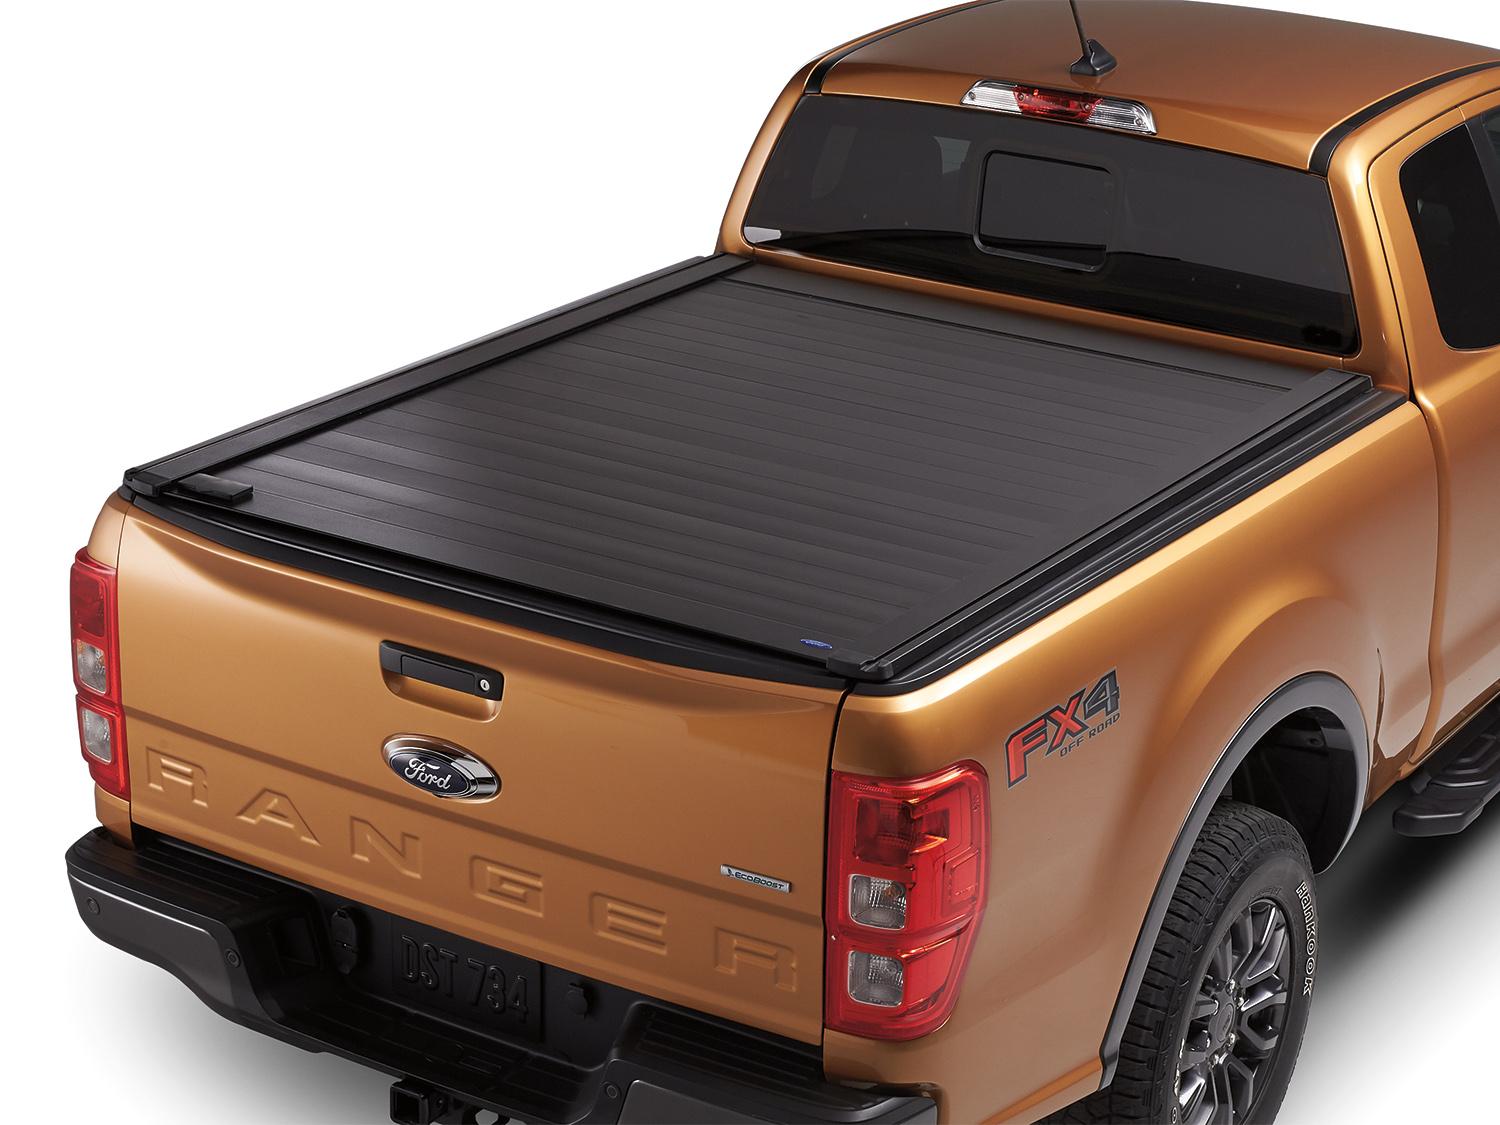 Image for Tonneau/Bed Cover - Retractable for 5' Bed from AccessoriesCanada